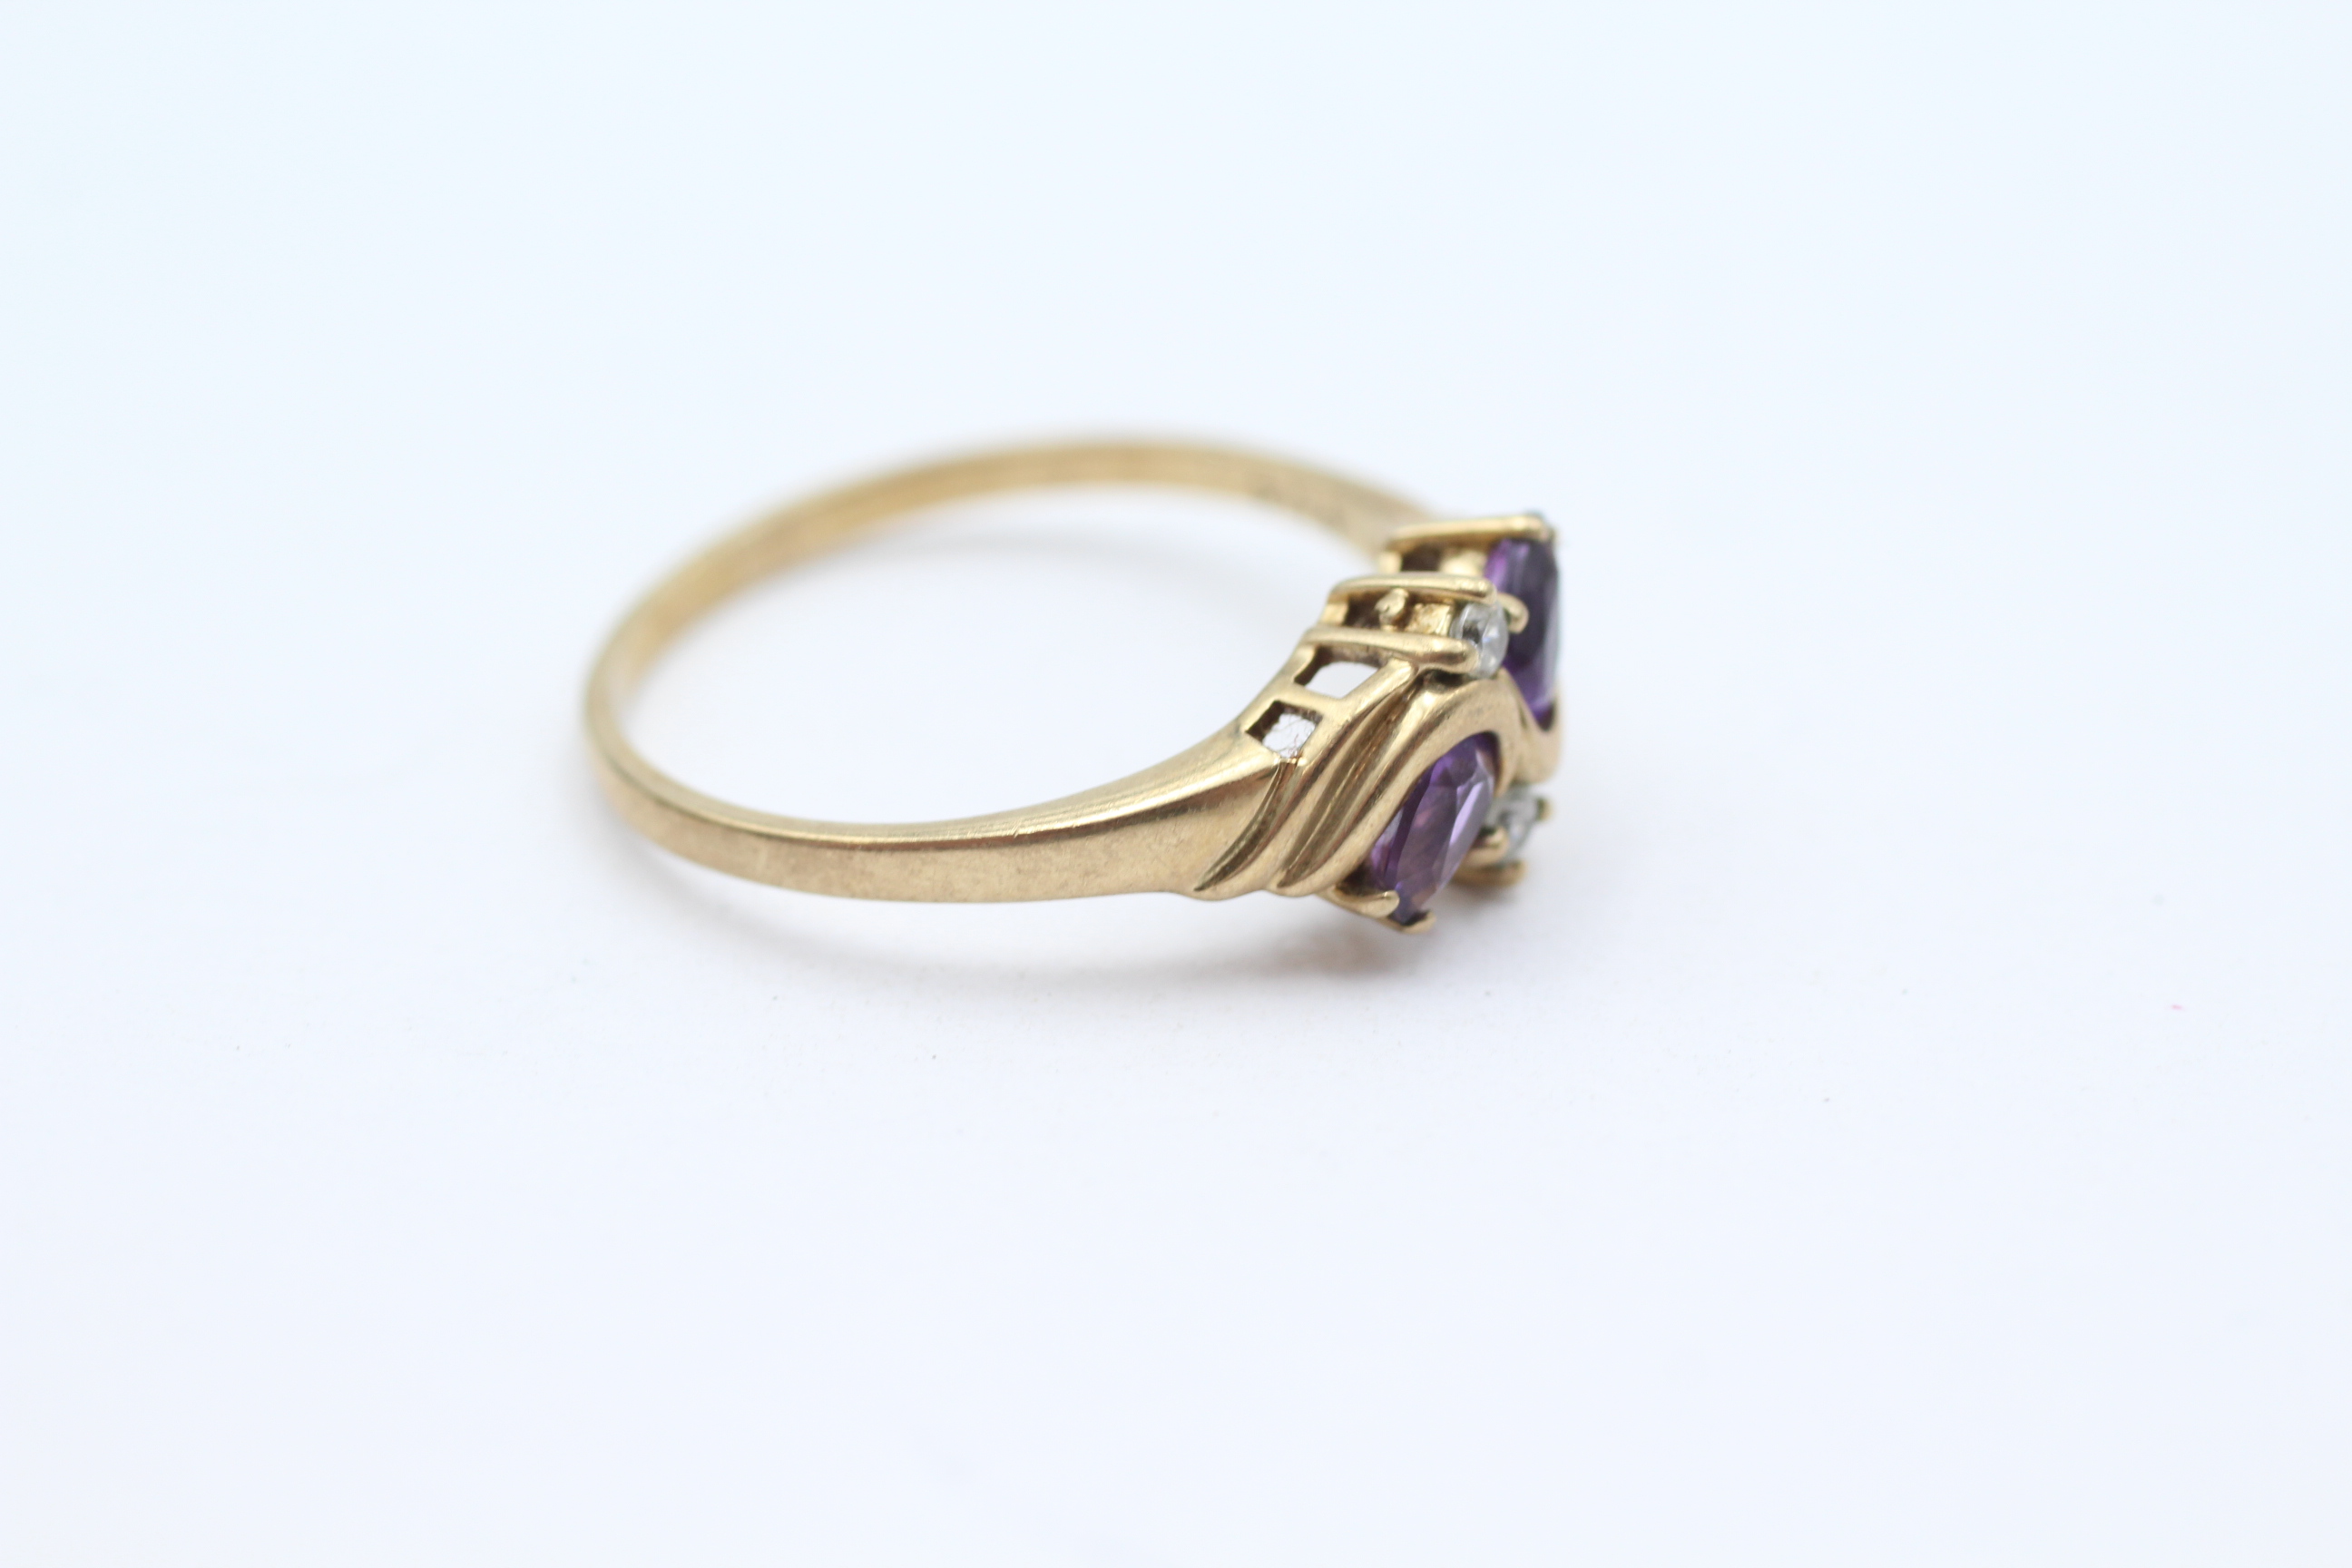 9ct gold amethyst & cubic zirconia four stone cluster ring Size Q - 1.9 g - Image 2 of 5